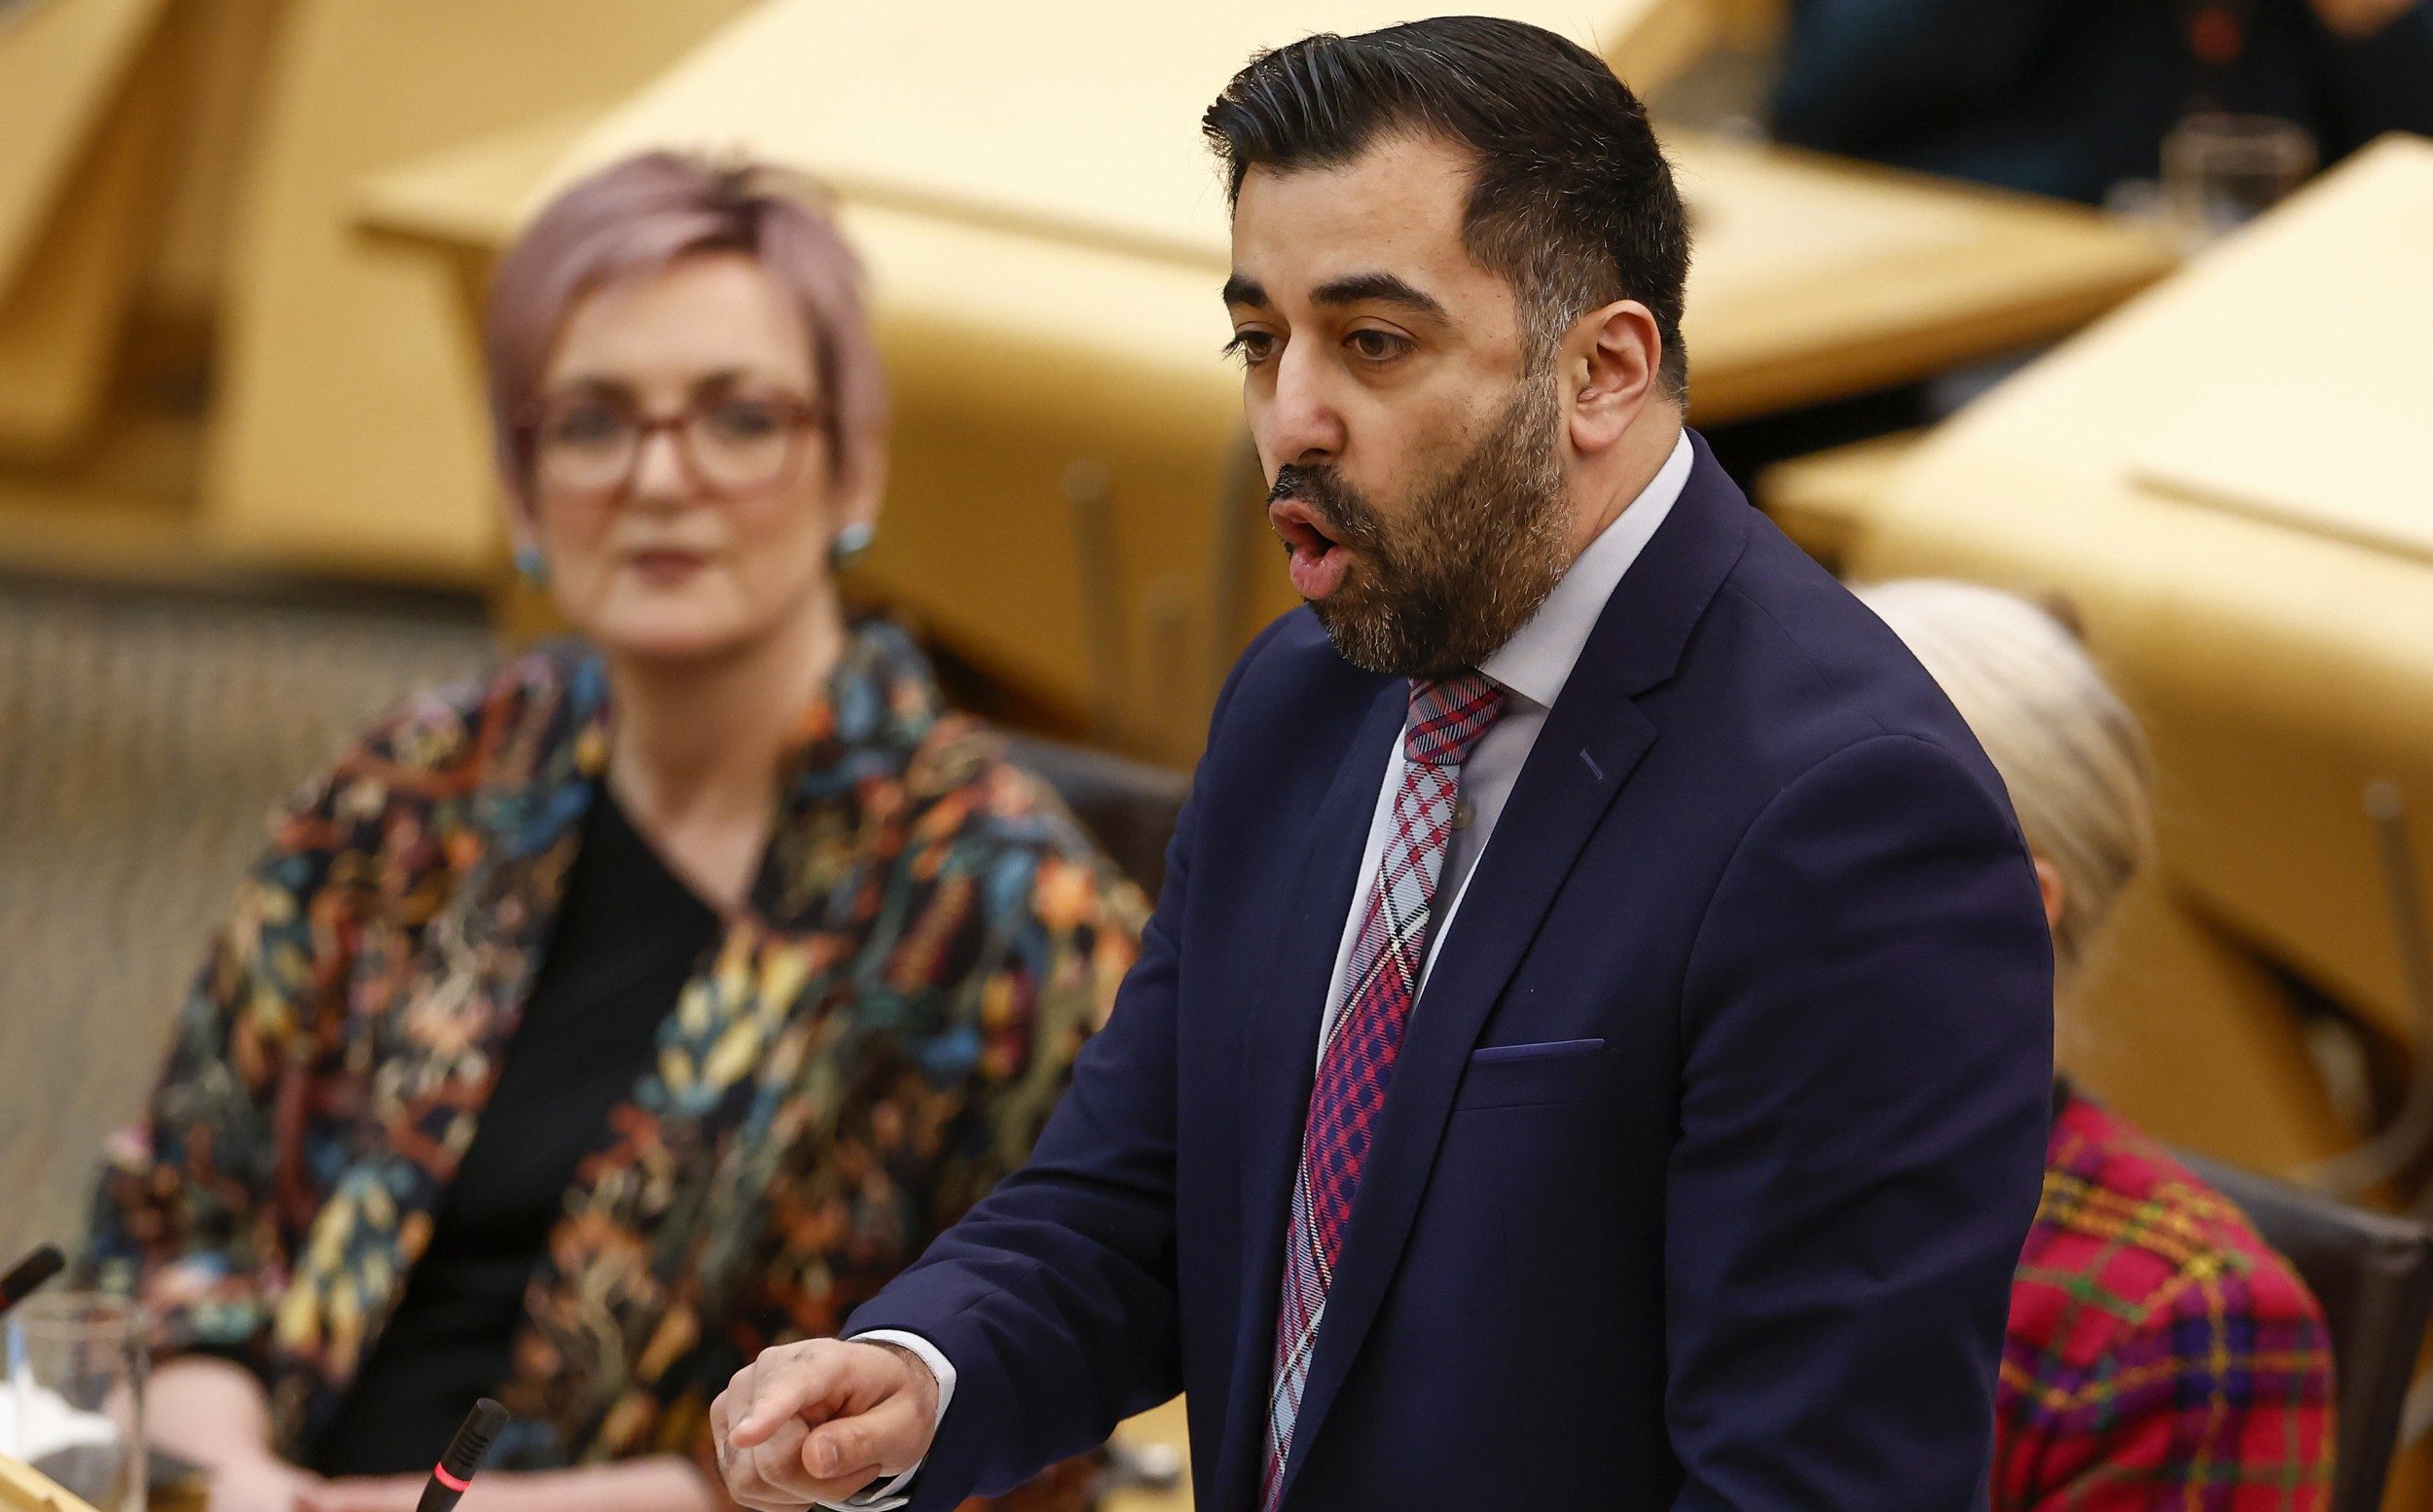 holyrood urged to call police to investigate michael matheson’s ipad roaming bill